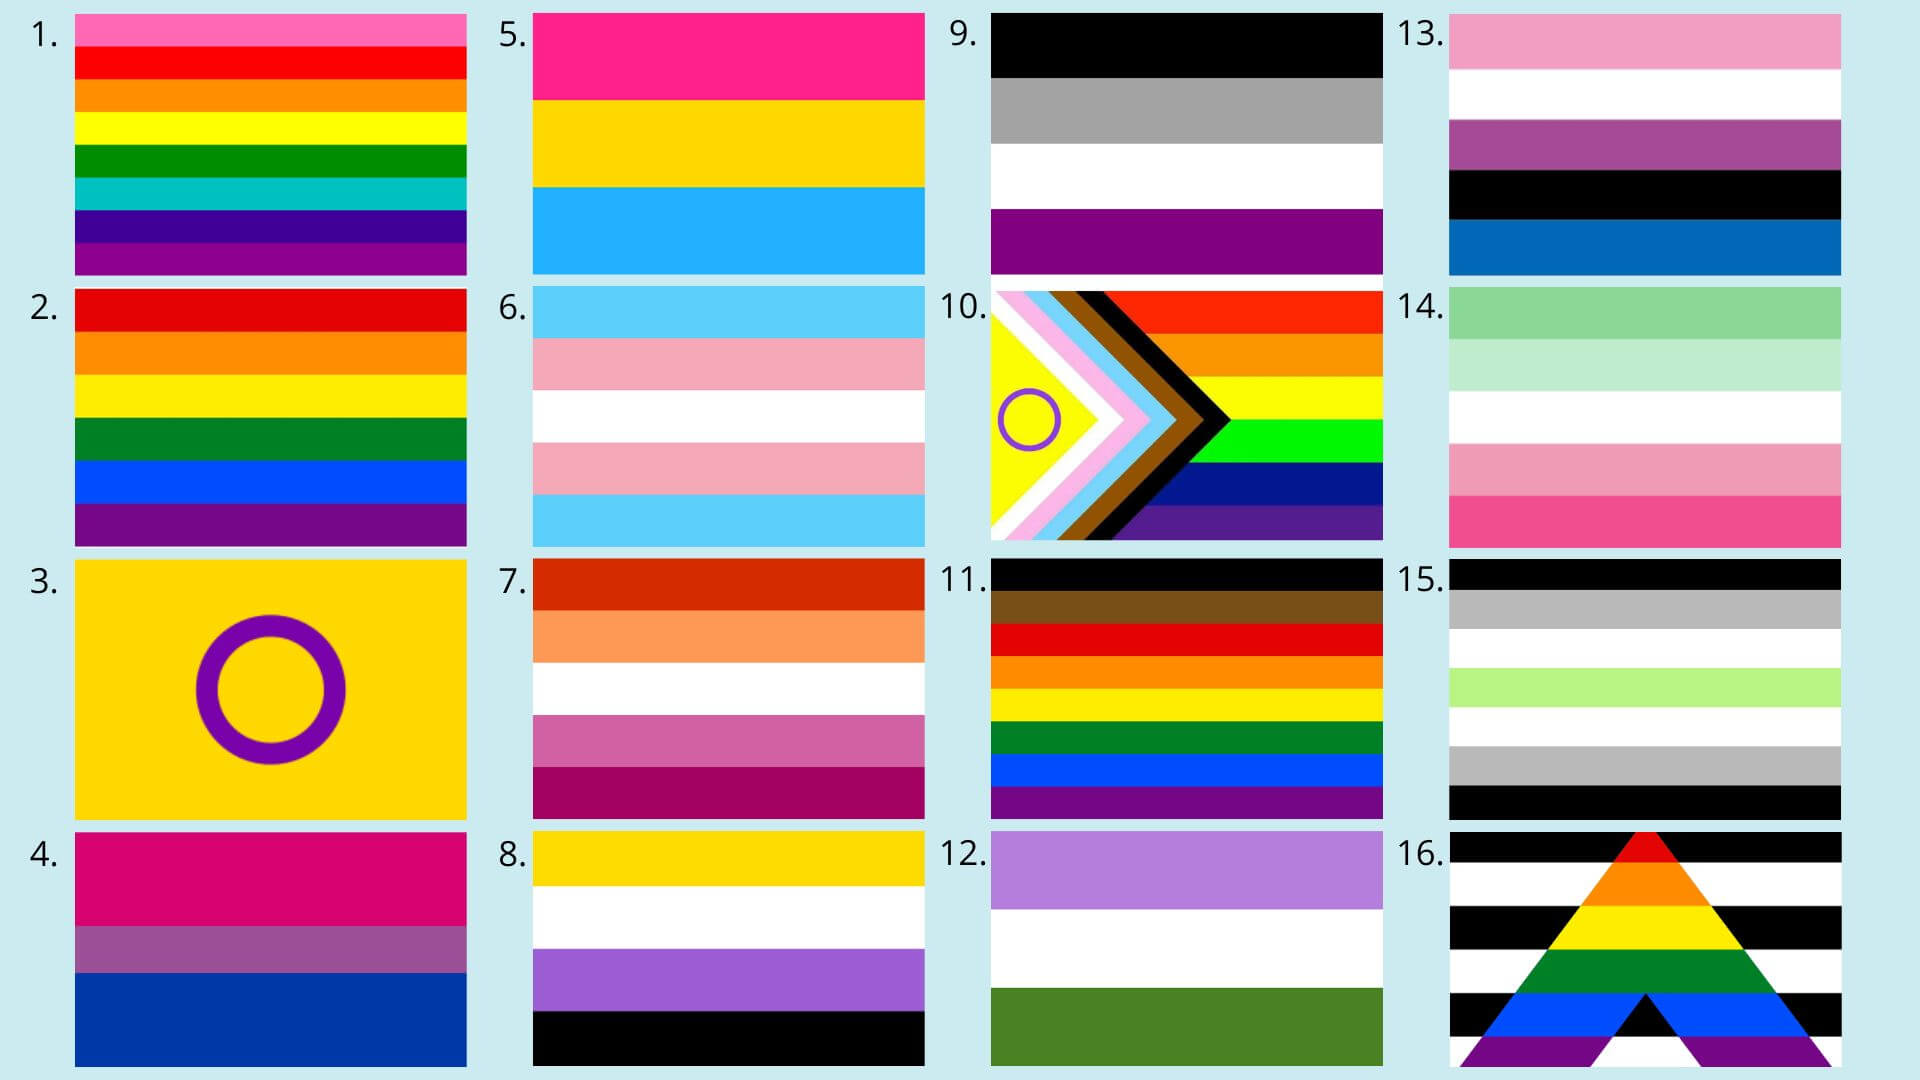 LGTBTQ+ Pride Flags And The Meaning Behind Them